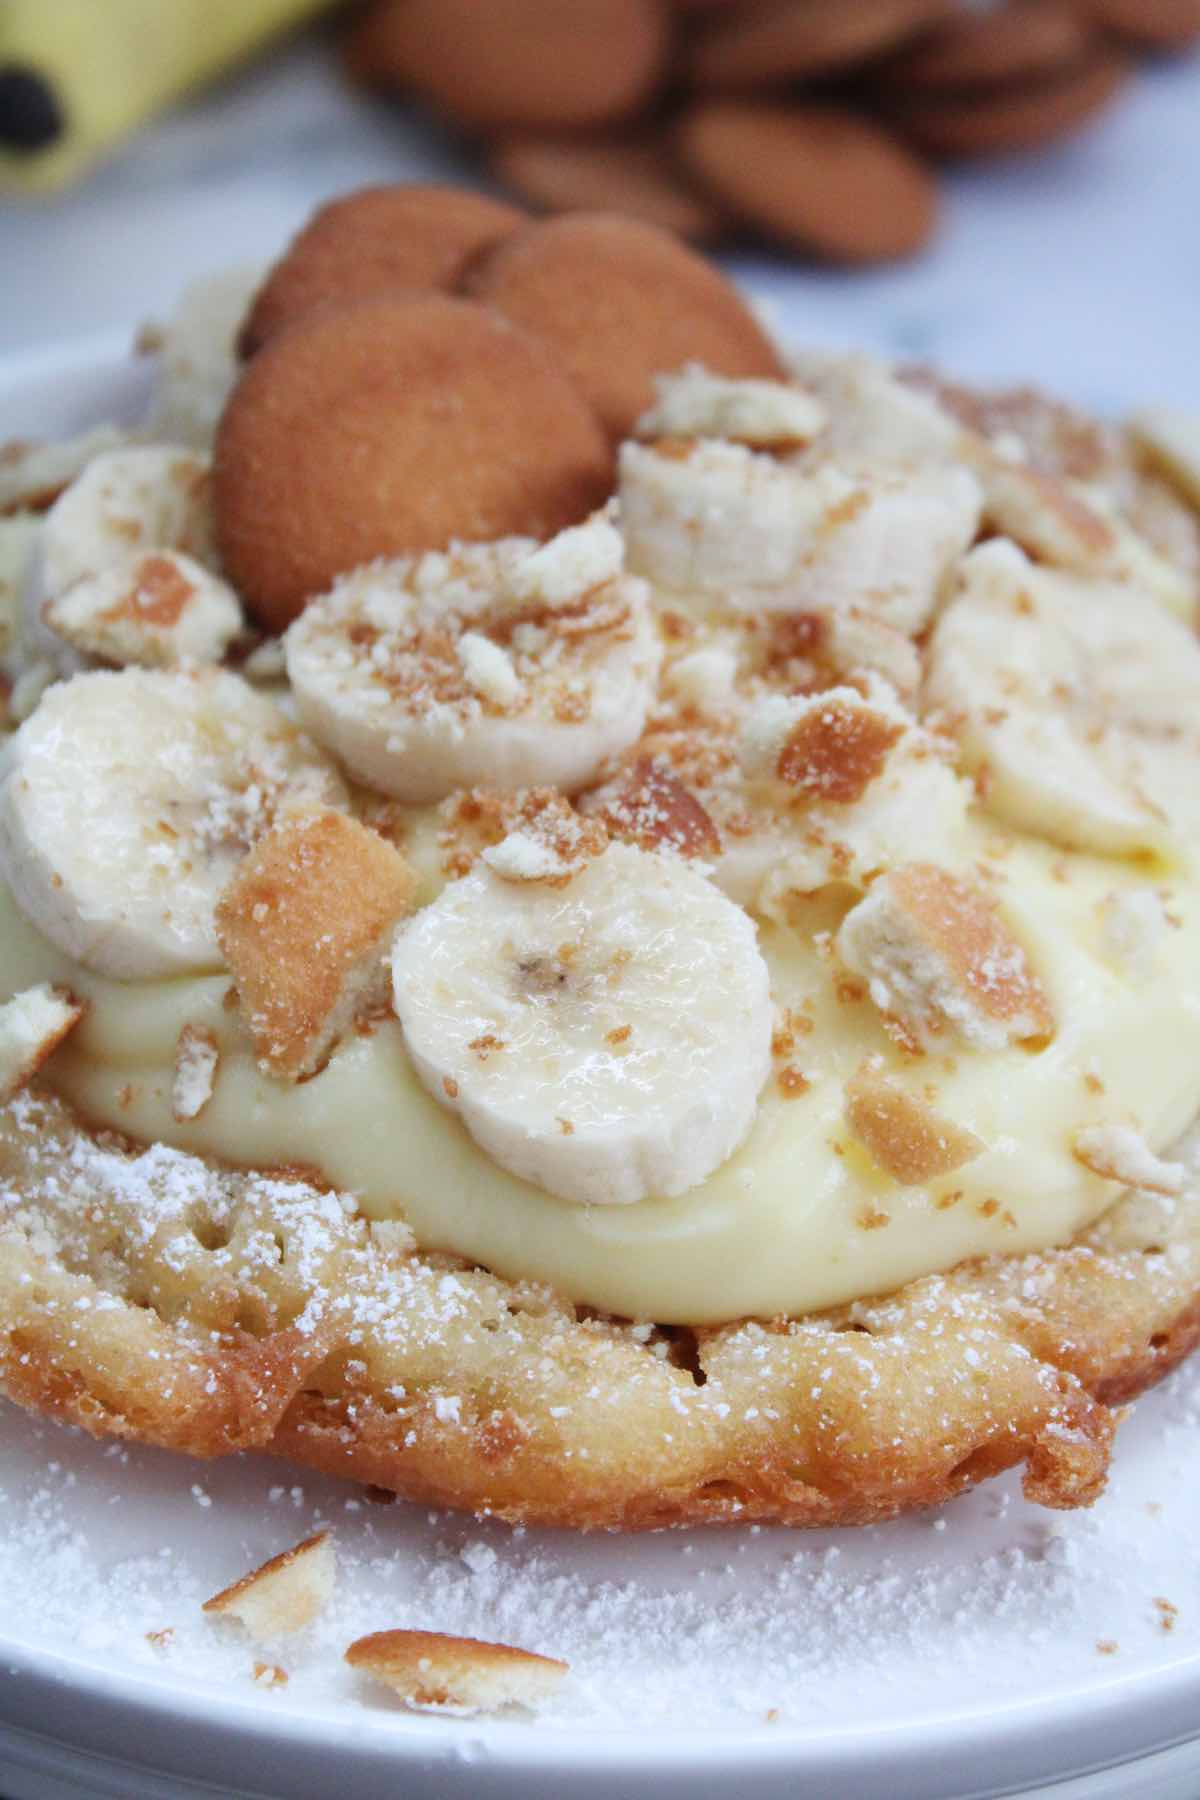 These banana pudding funnel cakes are not your average state food recipe. They're made with bisquick mix and topped with banana pudding, Nilla wafers and fresh bananas.